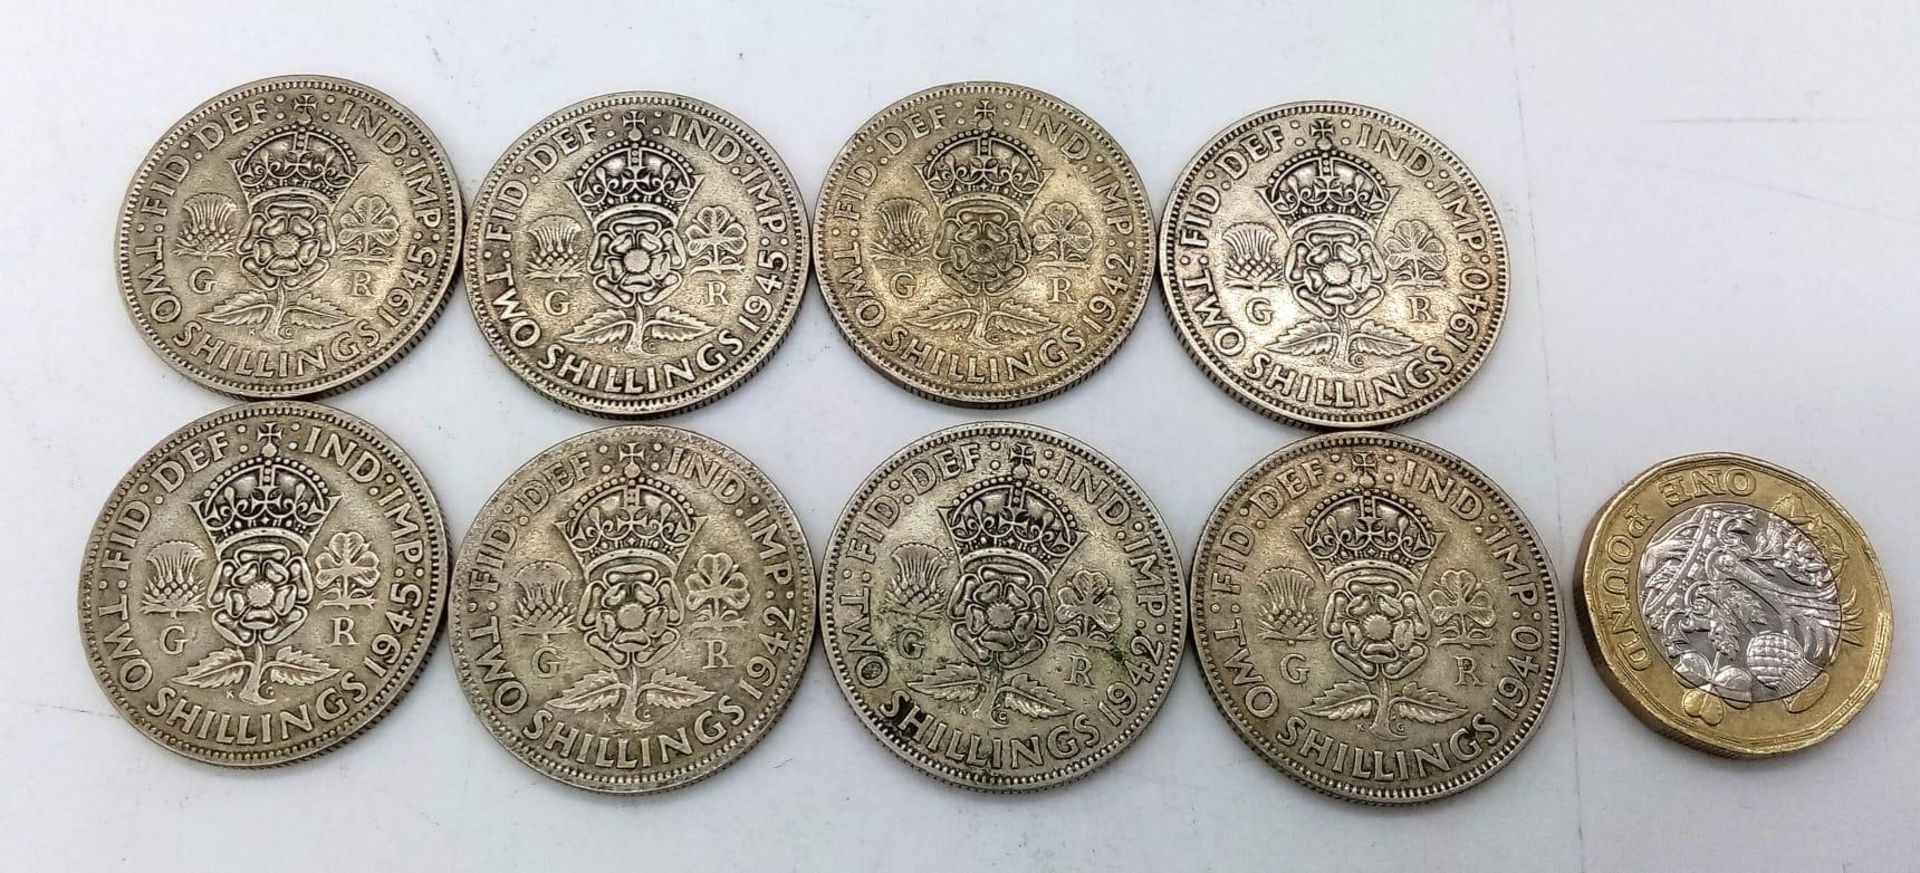 A Parcel of Eight Pre-1947, Silver Two Shilling Coins (Florins) Dates: 2 x 1940, 3 x 1942, 3 x 1945. - Image 3 of 3